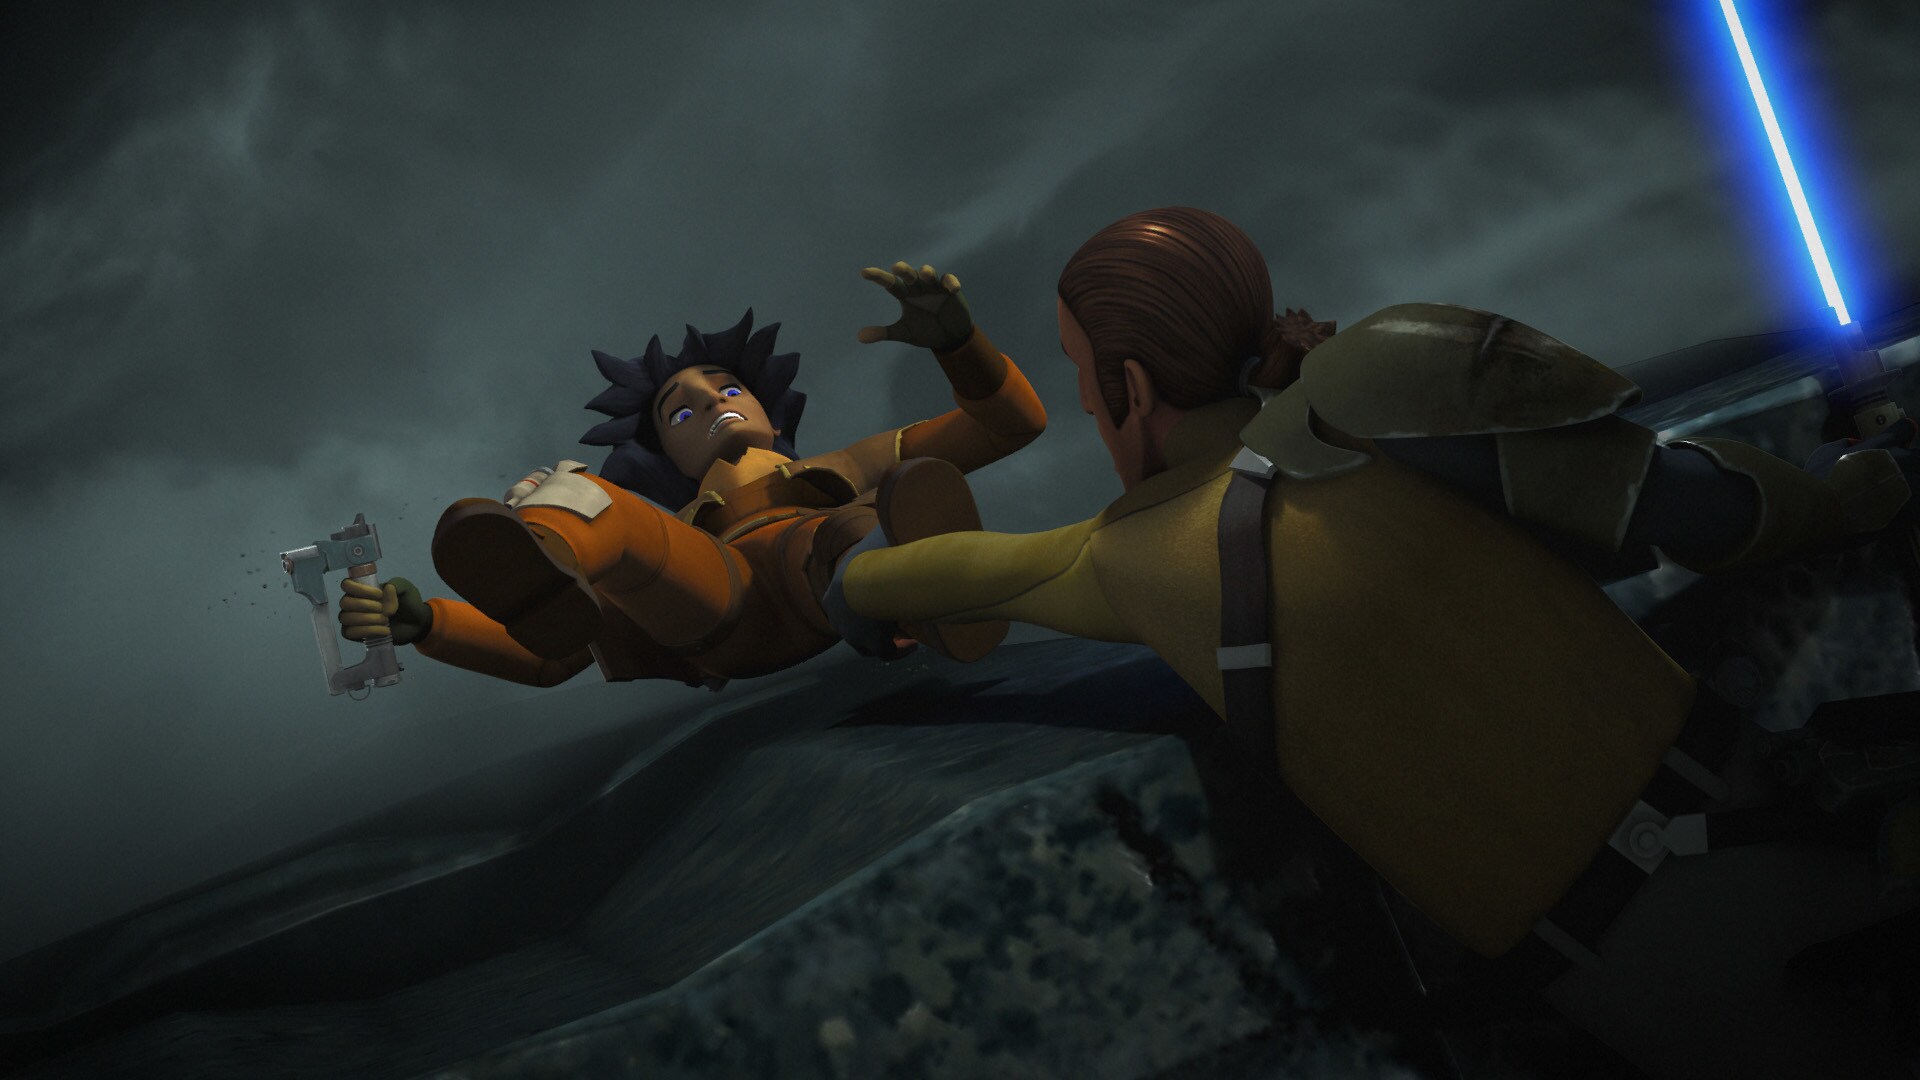 Kanan grabs his apprentice, saving him from certain death. He throws Ezra topside, and after some...